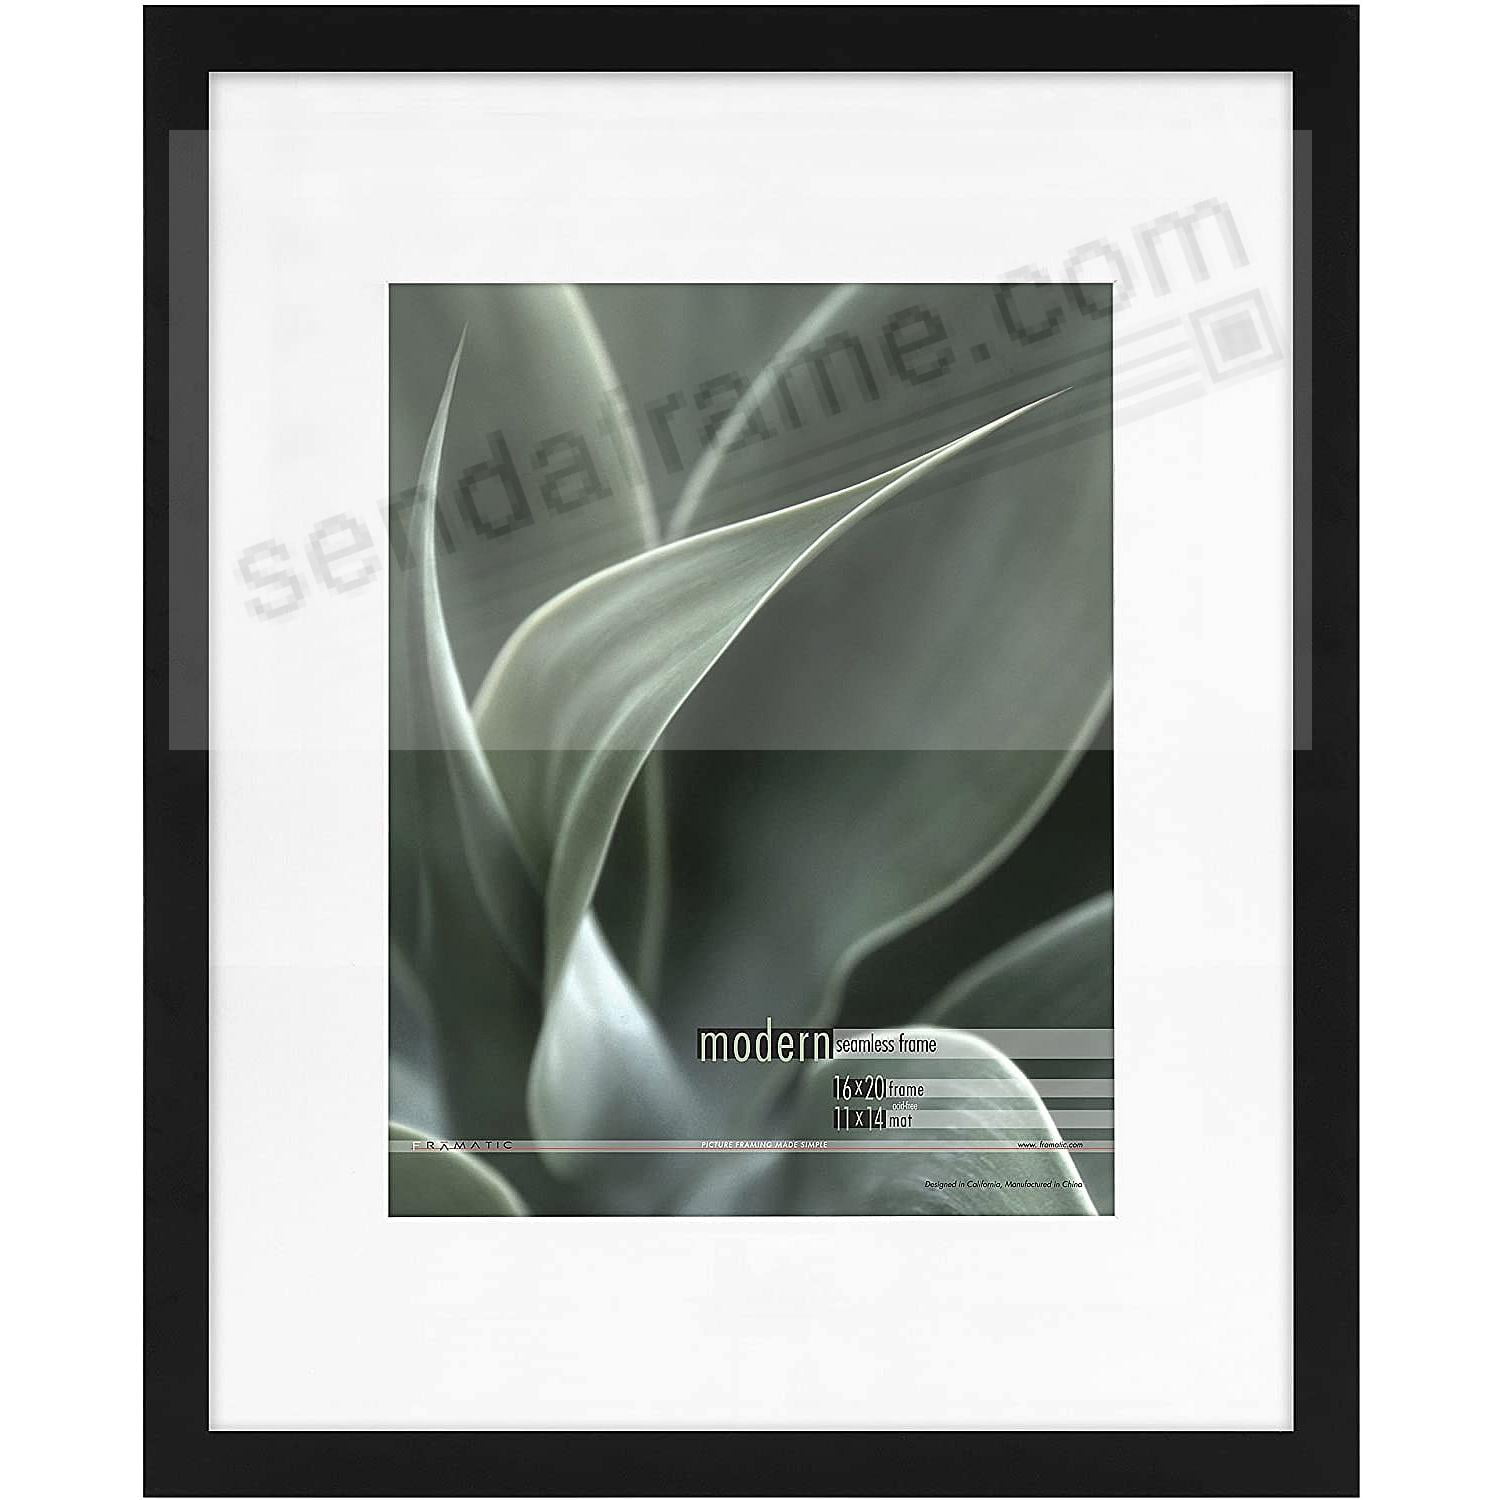 Framatic Metro 11 x 14 Seamless Face Frame Matted for 8 x 10